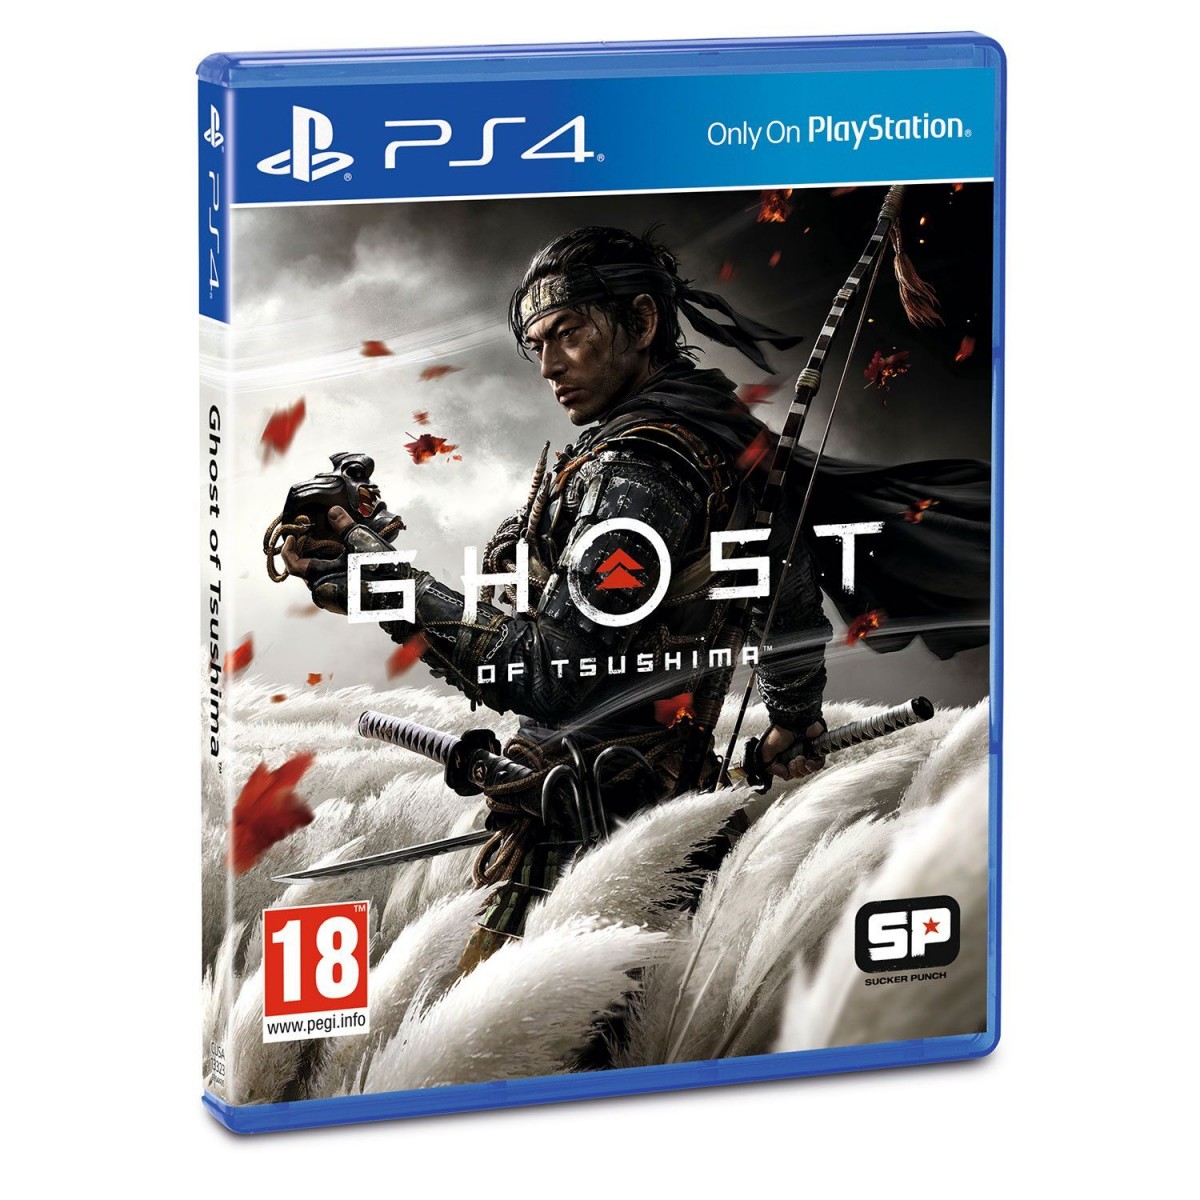 PS4 GHOST OF TSUSHIMA GAME